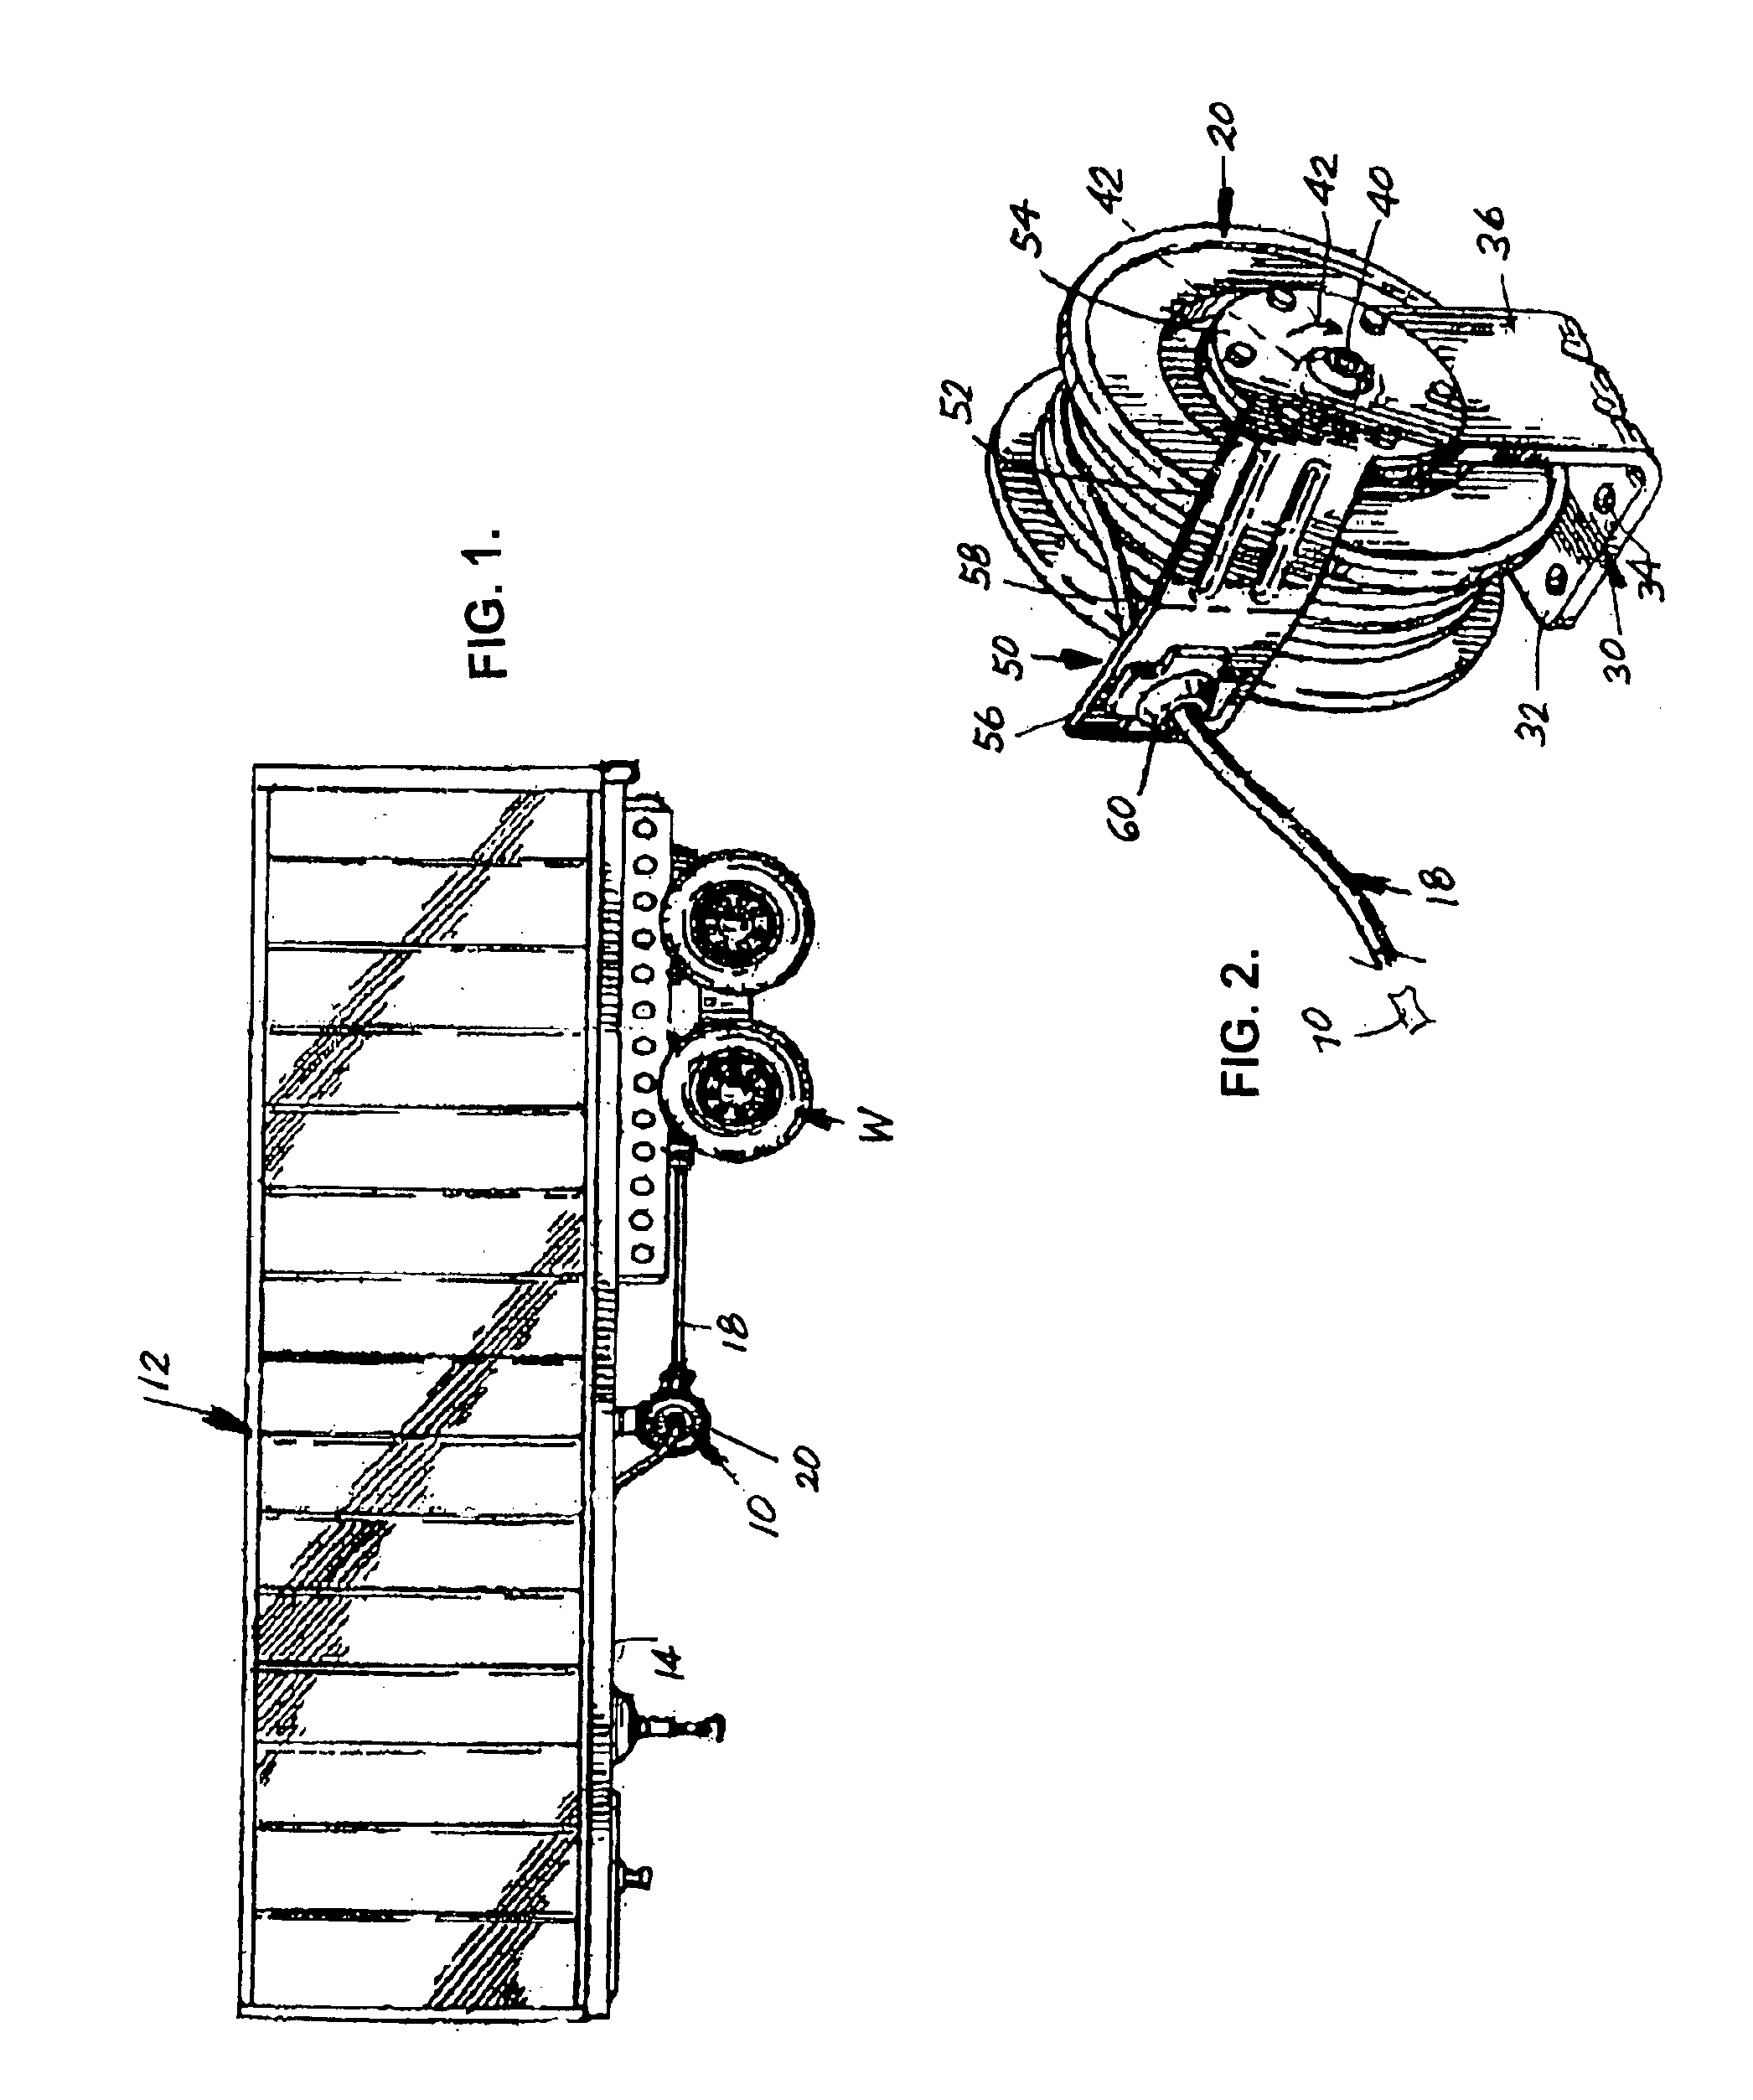 Fluid hose-supporting system for truck